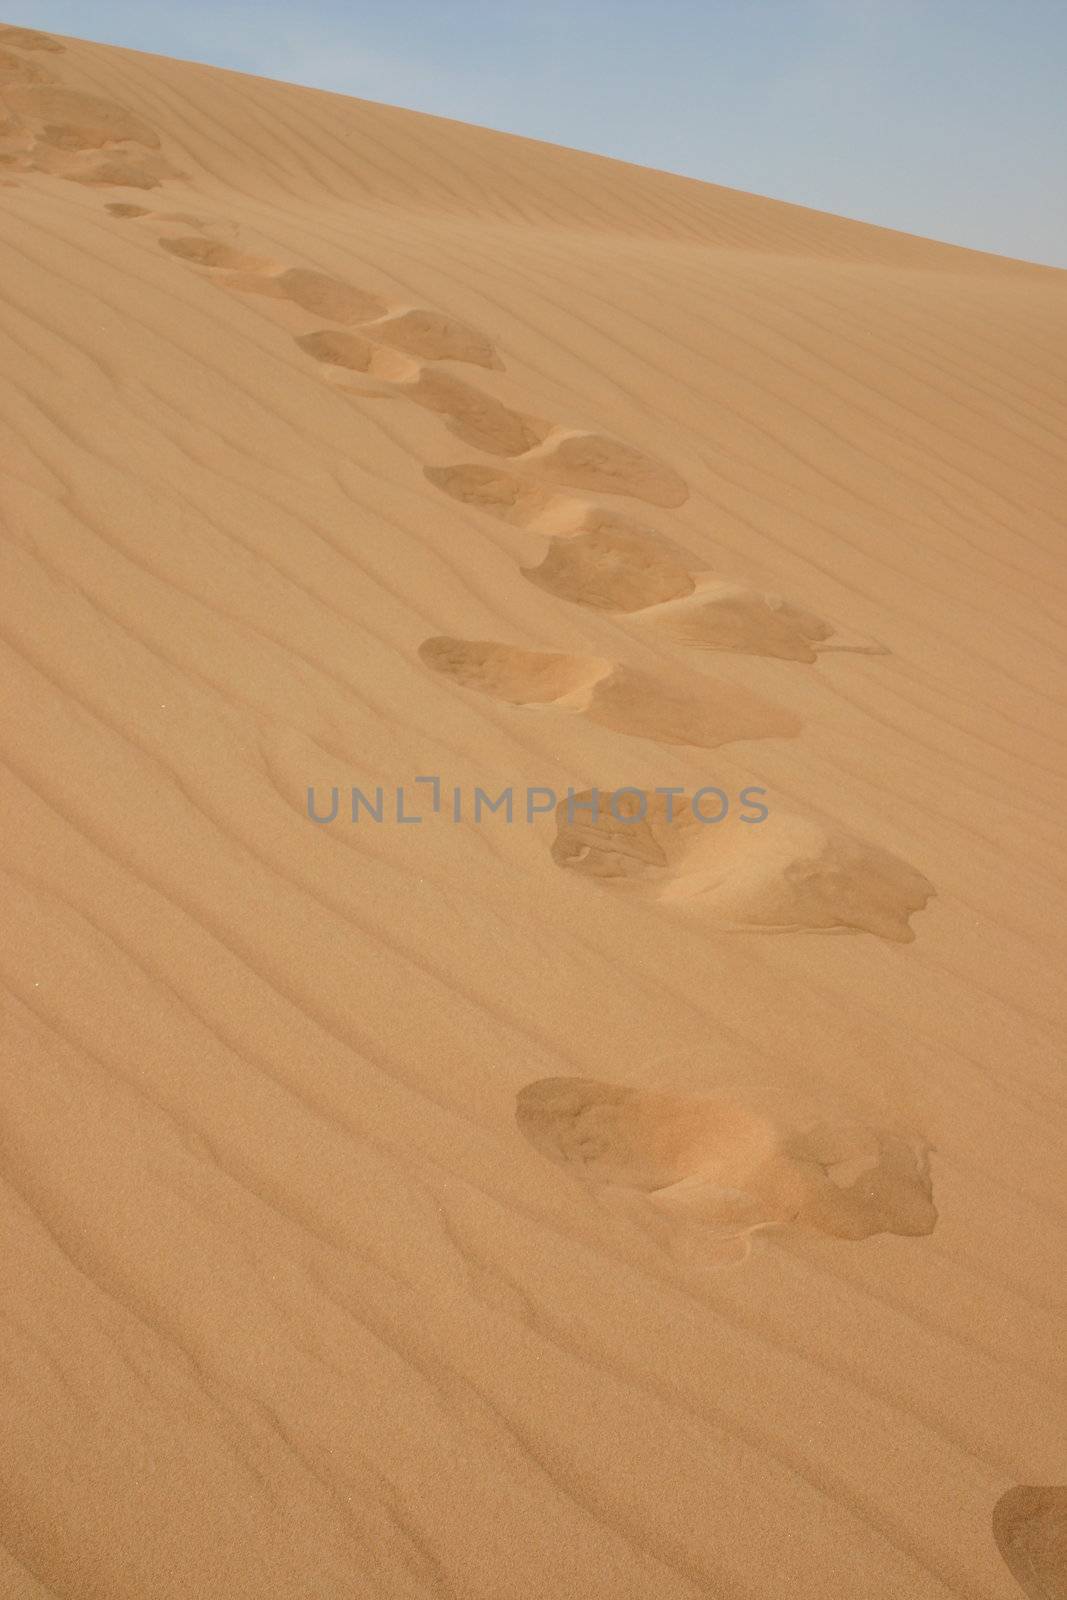 Footsteps in the desert by michele